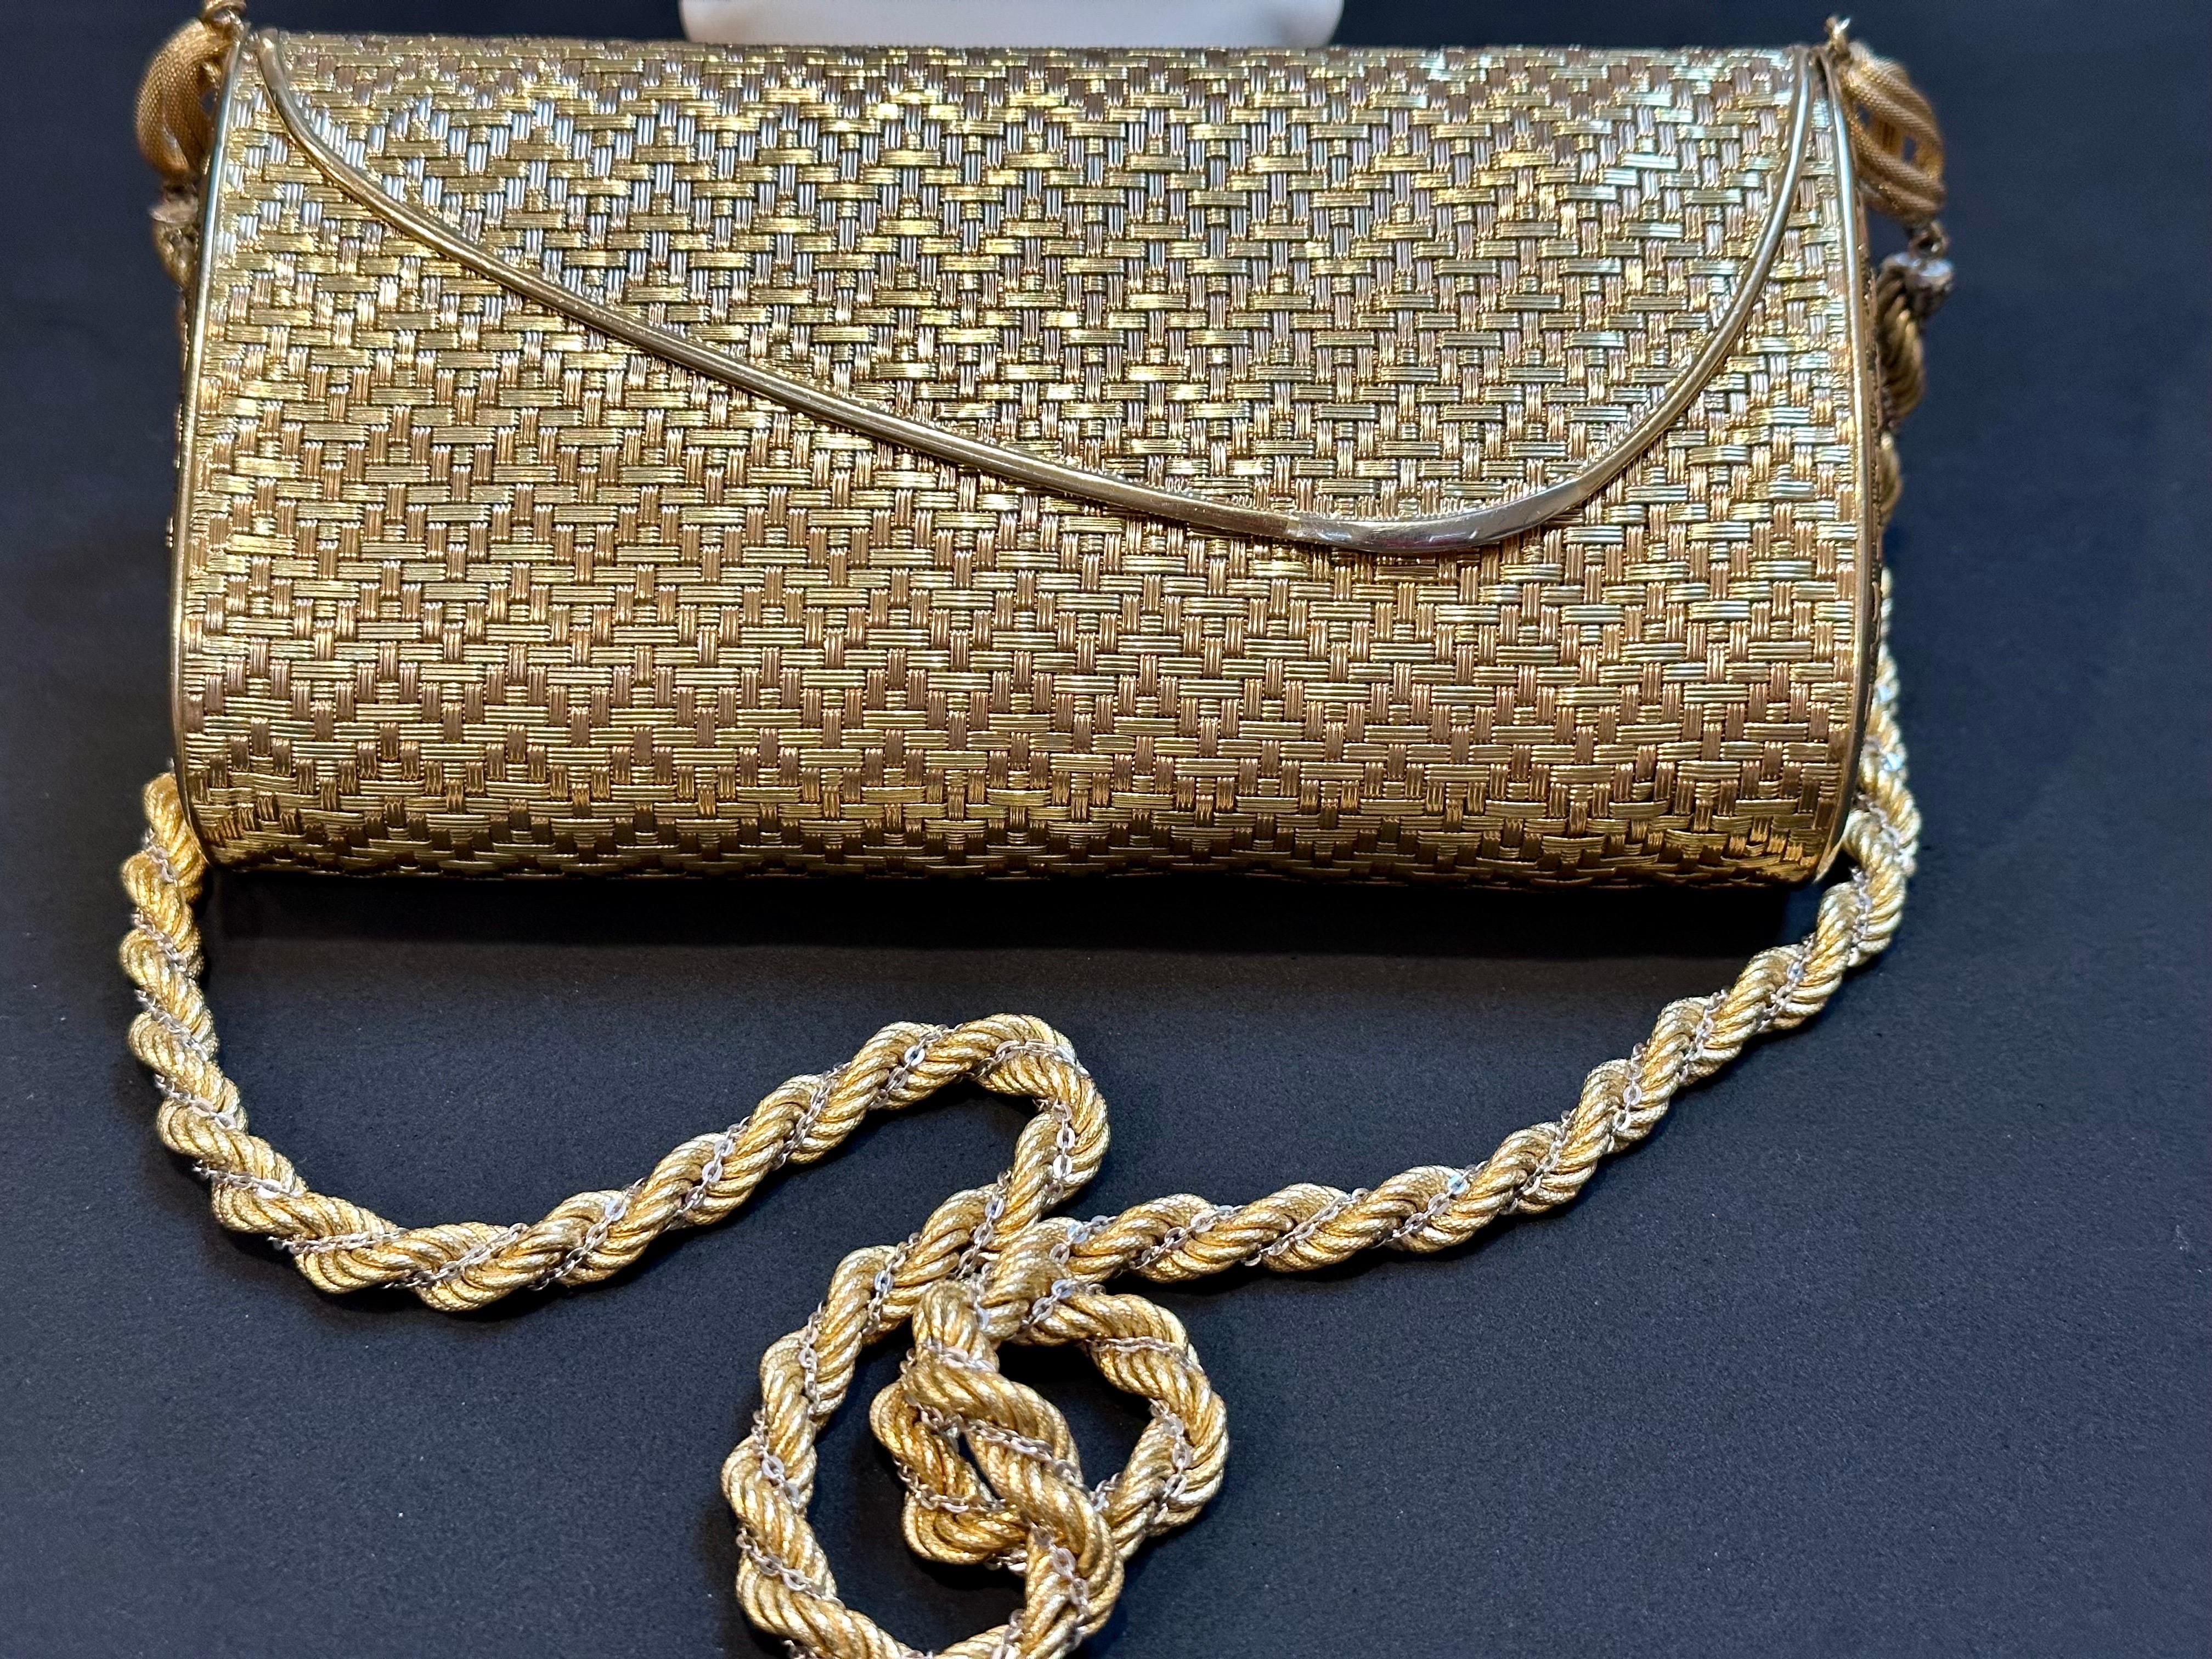 Cartier 18k Yellow Gold Mesh Purse Handbag with Shoulder Chain Rare 401 Gm For Sale 5